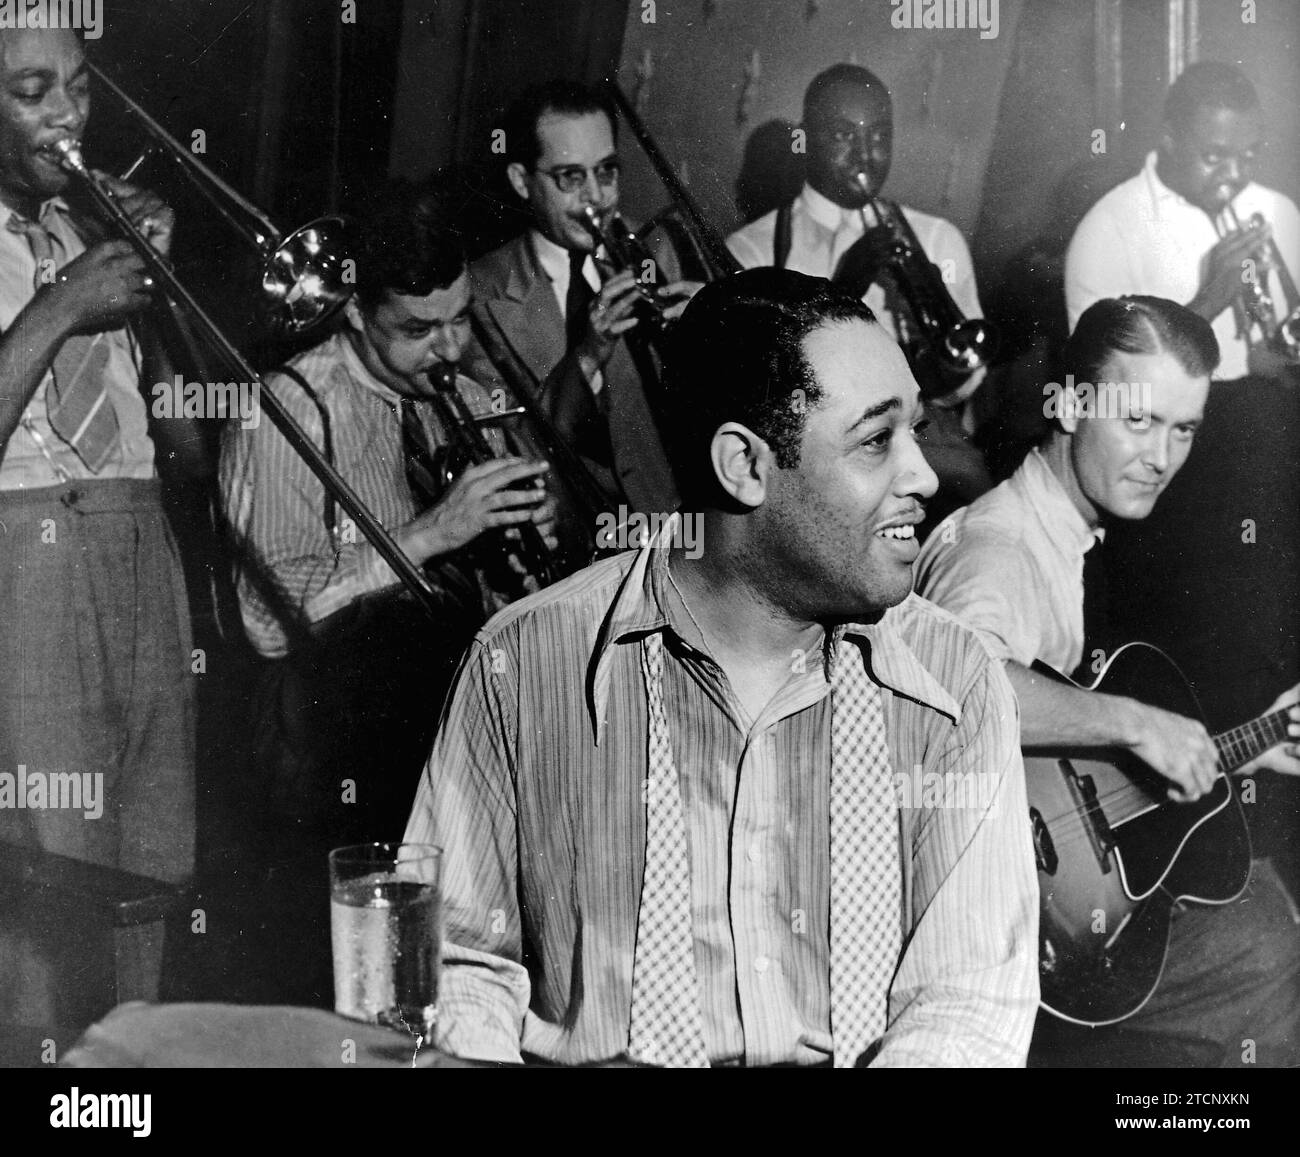 Duke Ellington, born in Washington, is the representation of the New Orleans or Harlem Jazz style. This photograph, taken in 1930, shows guitarist Eddie Condon on the right. Ellington became more famous not so much as a jazz pianist, but for his ease in composing and his willingness to conduct the orchestra. Credit: Album / Archivo ABC Stock Photo